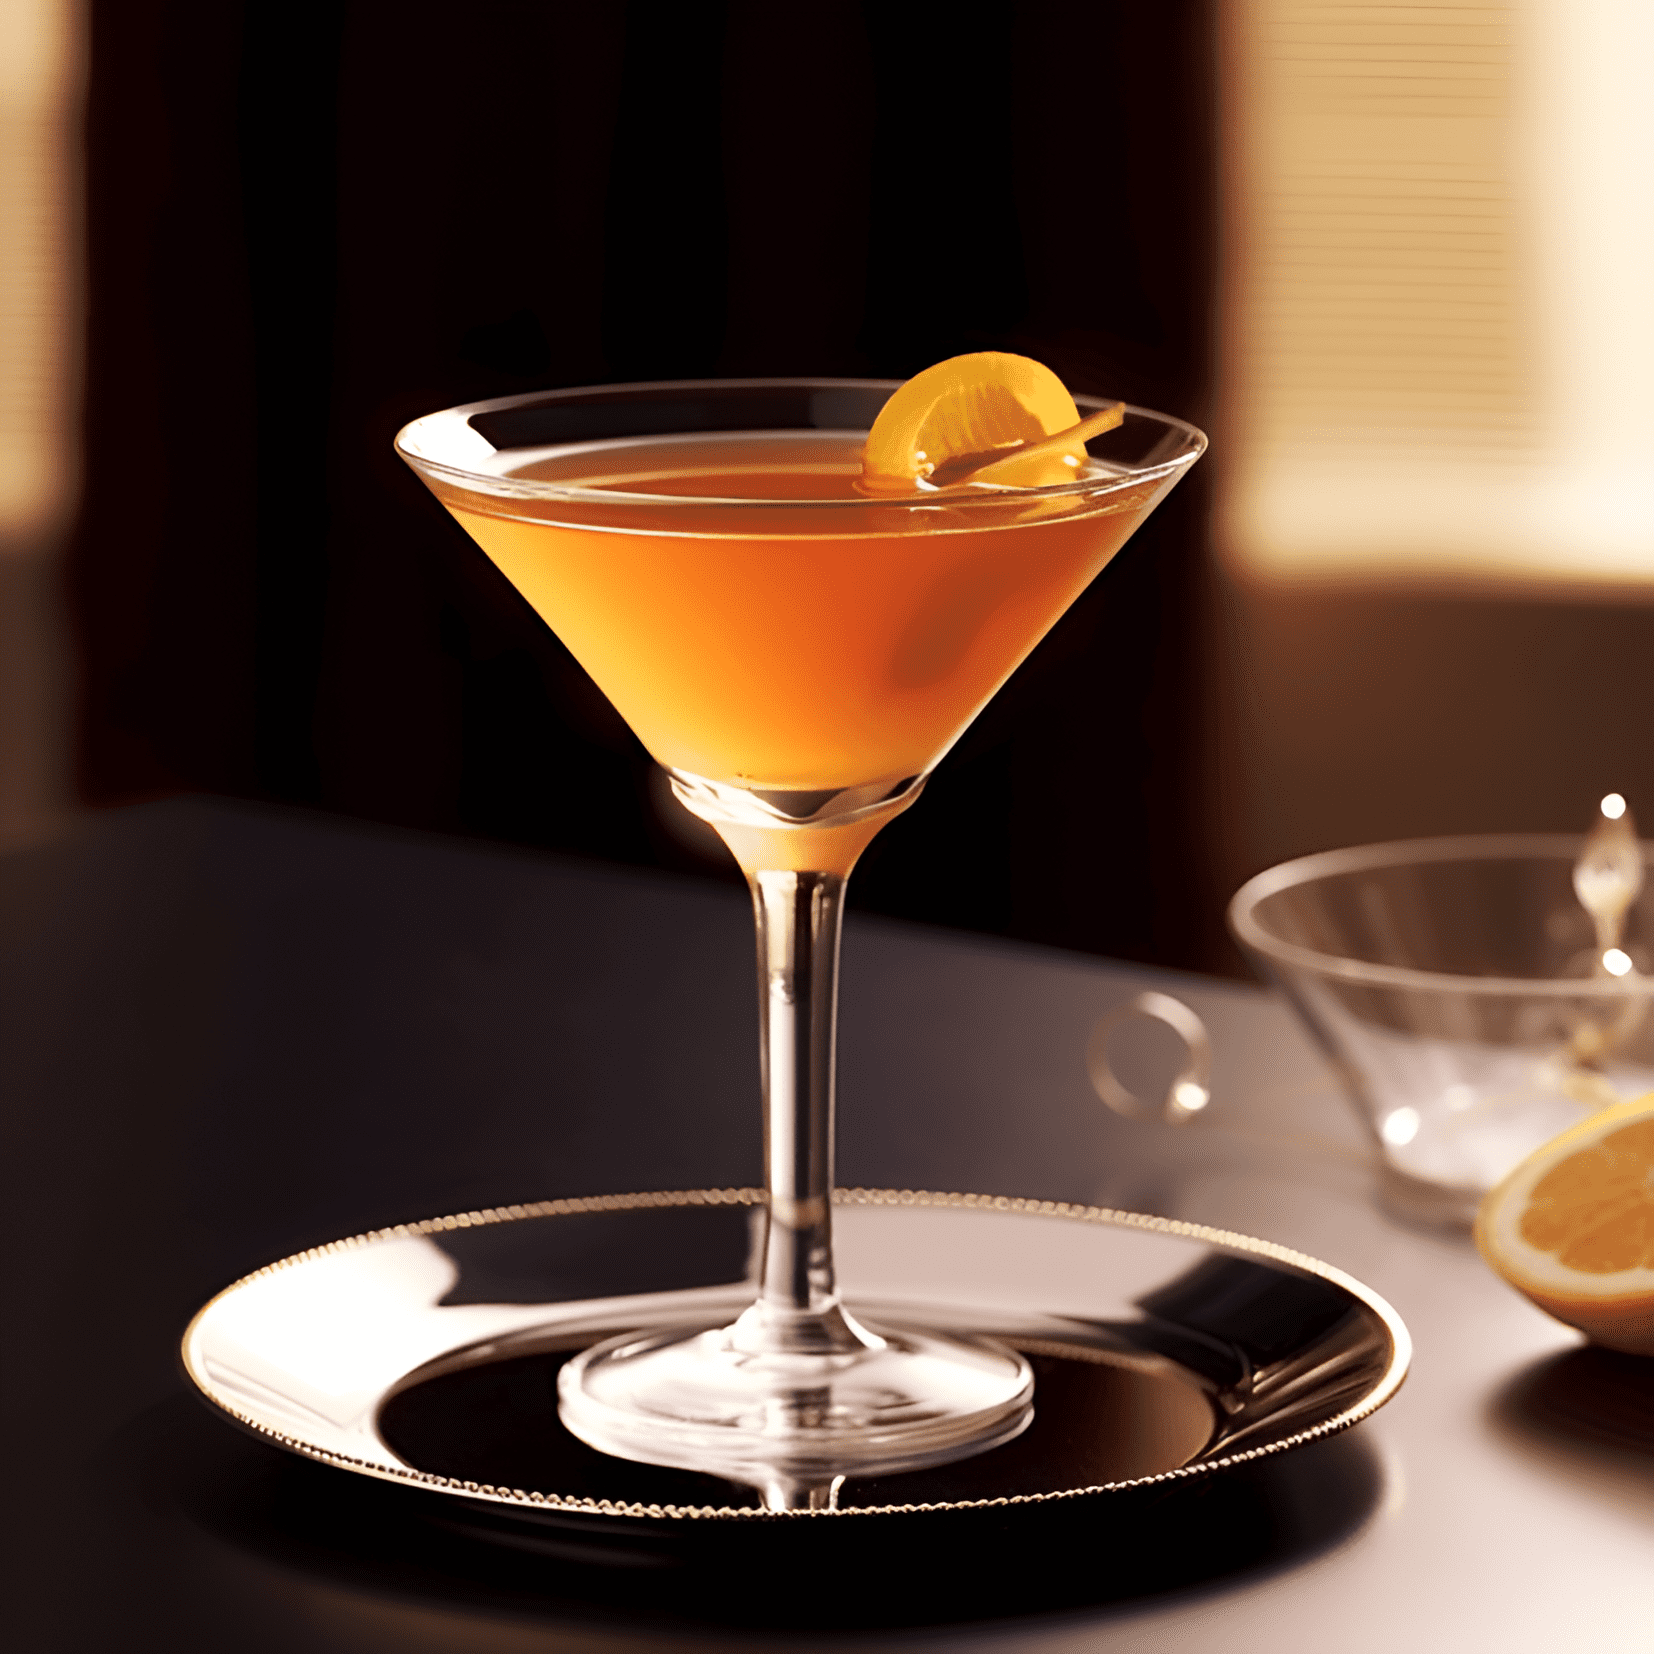 Artillery Cocktail Recipe - The Artillery cocktail has a bold, robust flavor profile with a perfect balance of sweetness and bitterness. It is strong, slightly sweet, and herbal with a hint of citrus.